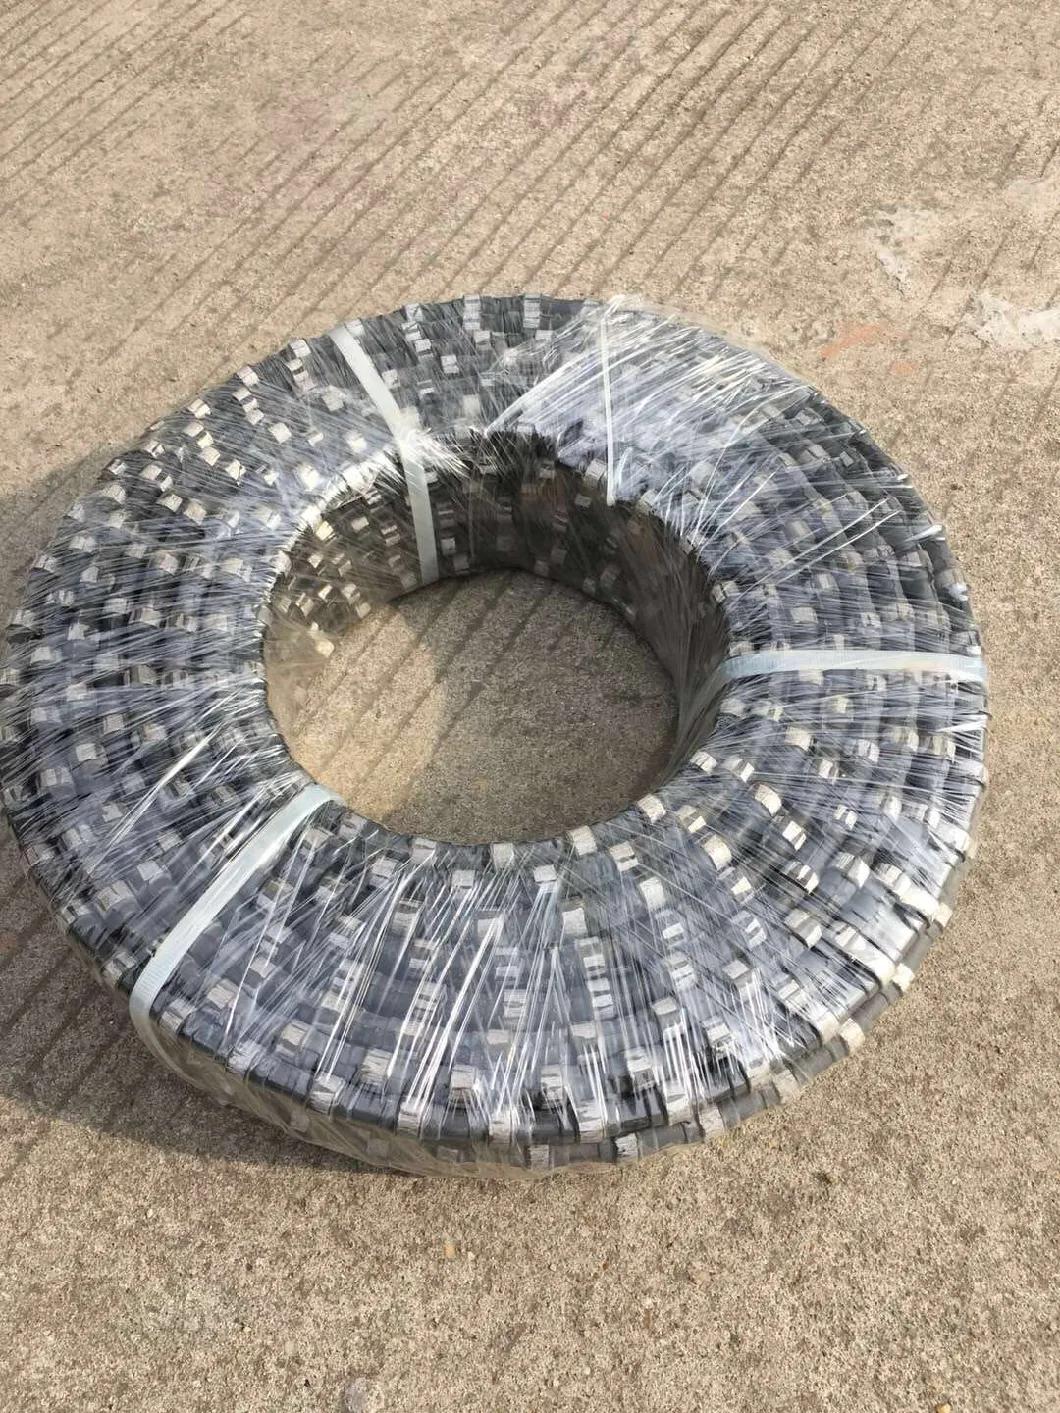 Wholesale 11.5mm Diamond Wire Saw Cutting Rope for Granite Quarry Stone Cutting